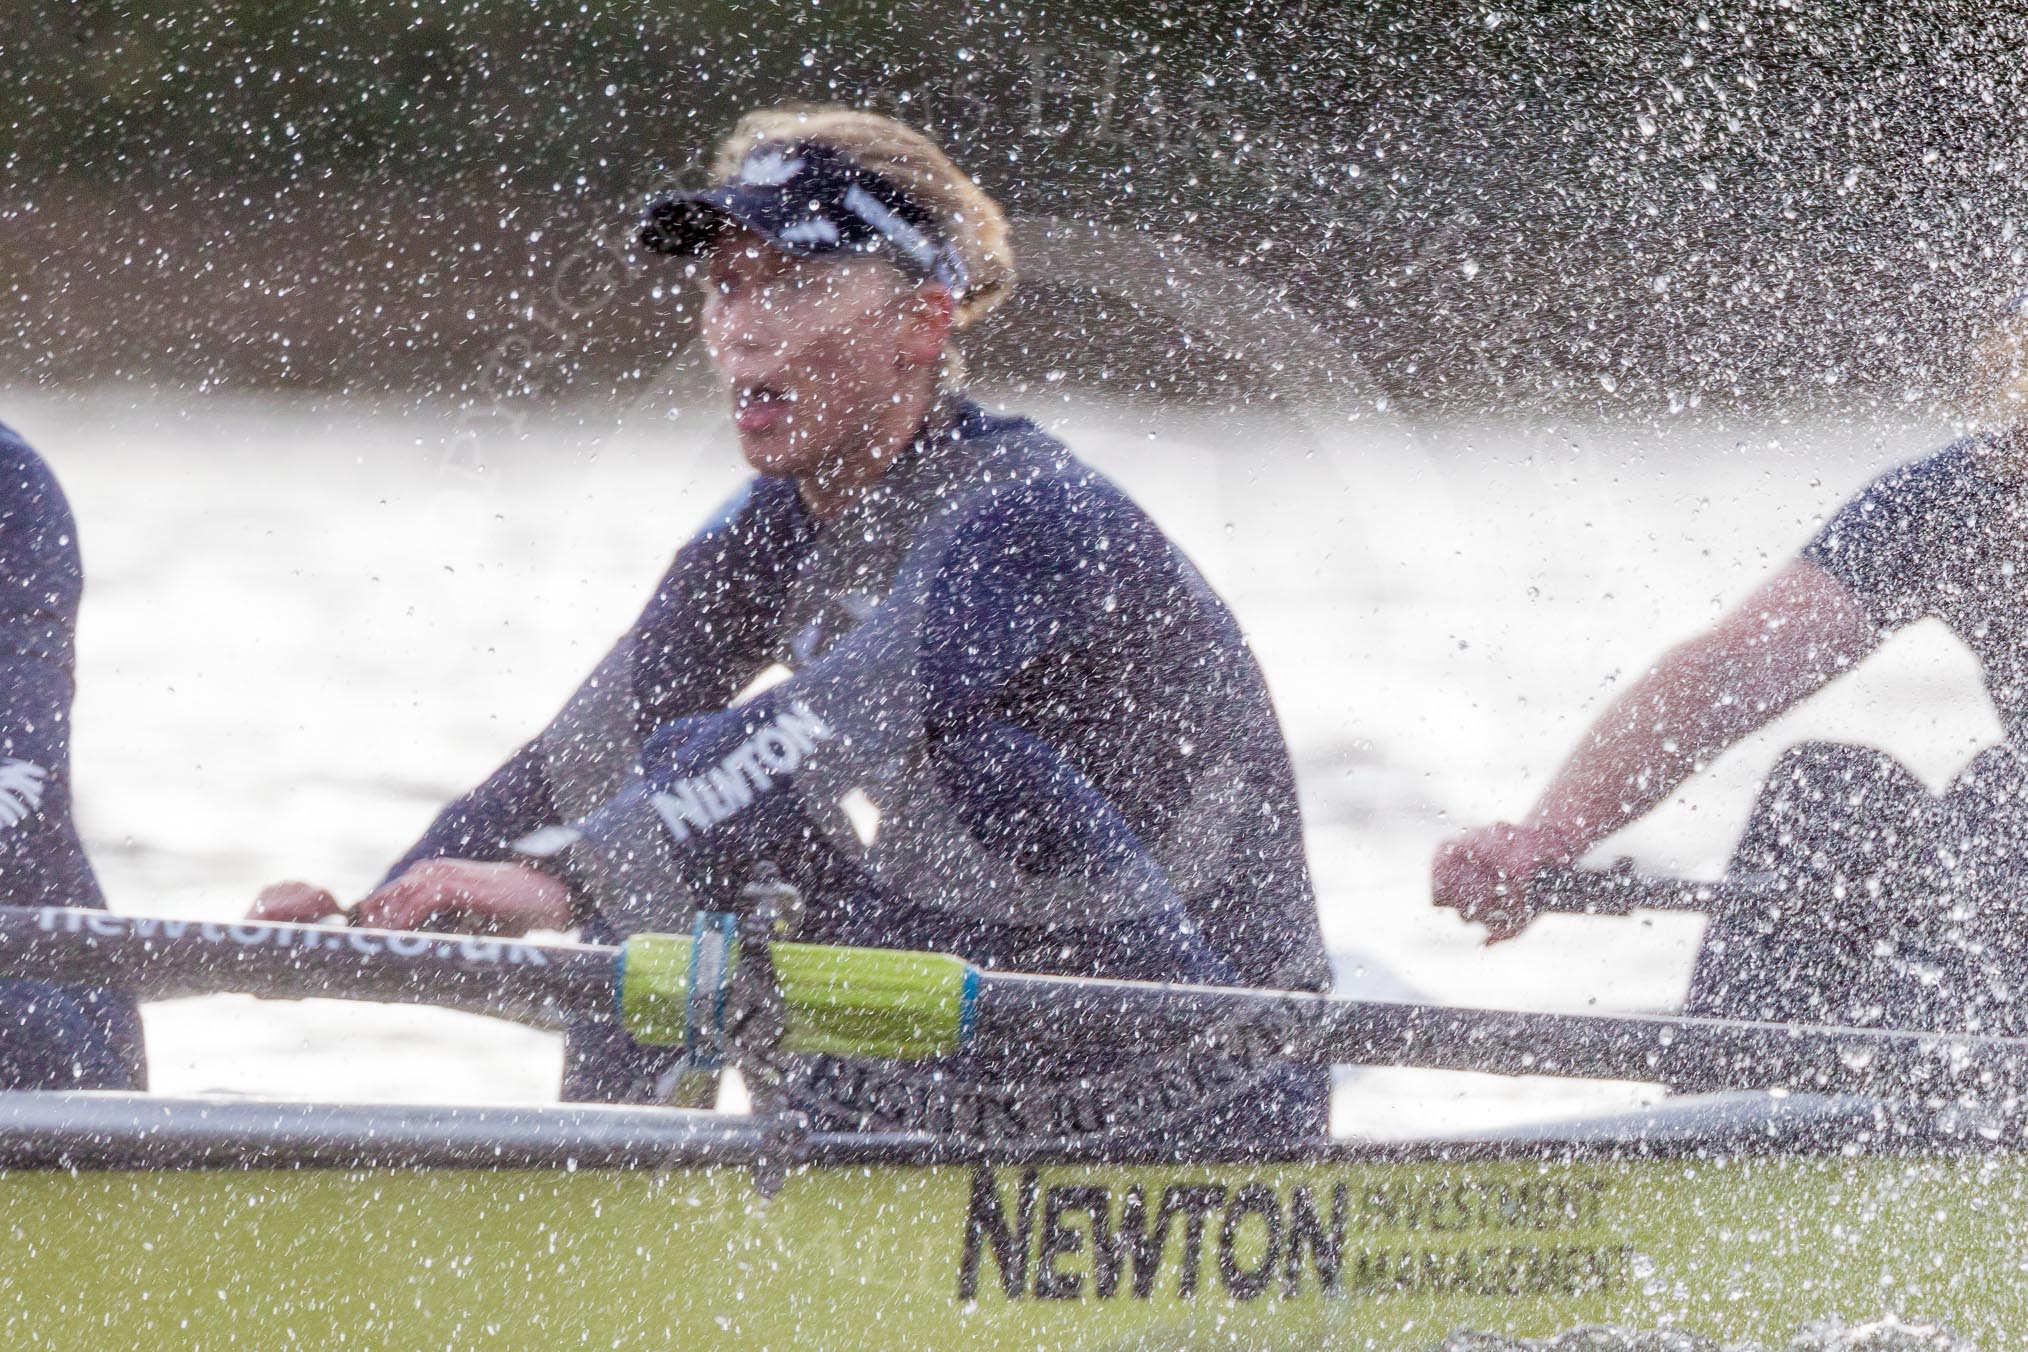 The Boat Race season 2016 - Women's Boat Race Trial Eights (OUWBC, Oxford): "Charybdis" , here 6-Elo Luik, almost hidden behind spray.
River Thames between Putney Bridge and Mortlake,
London SW15,

United Kingdom,
on 10 December 2015 at 12:29, image #257